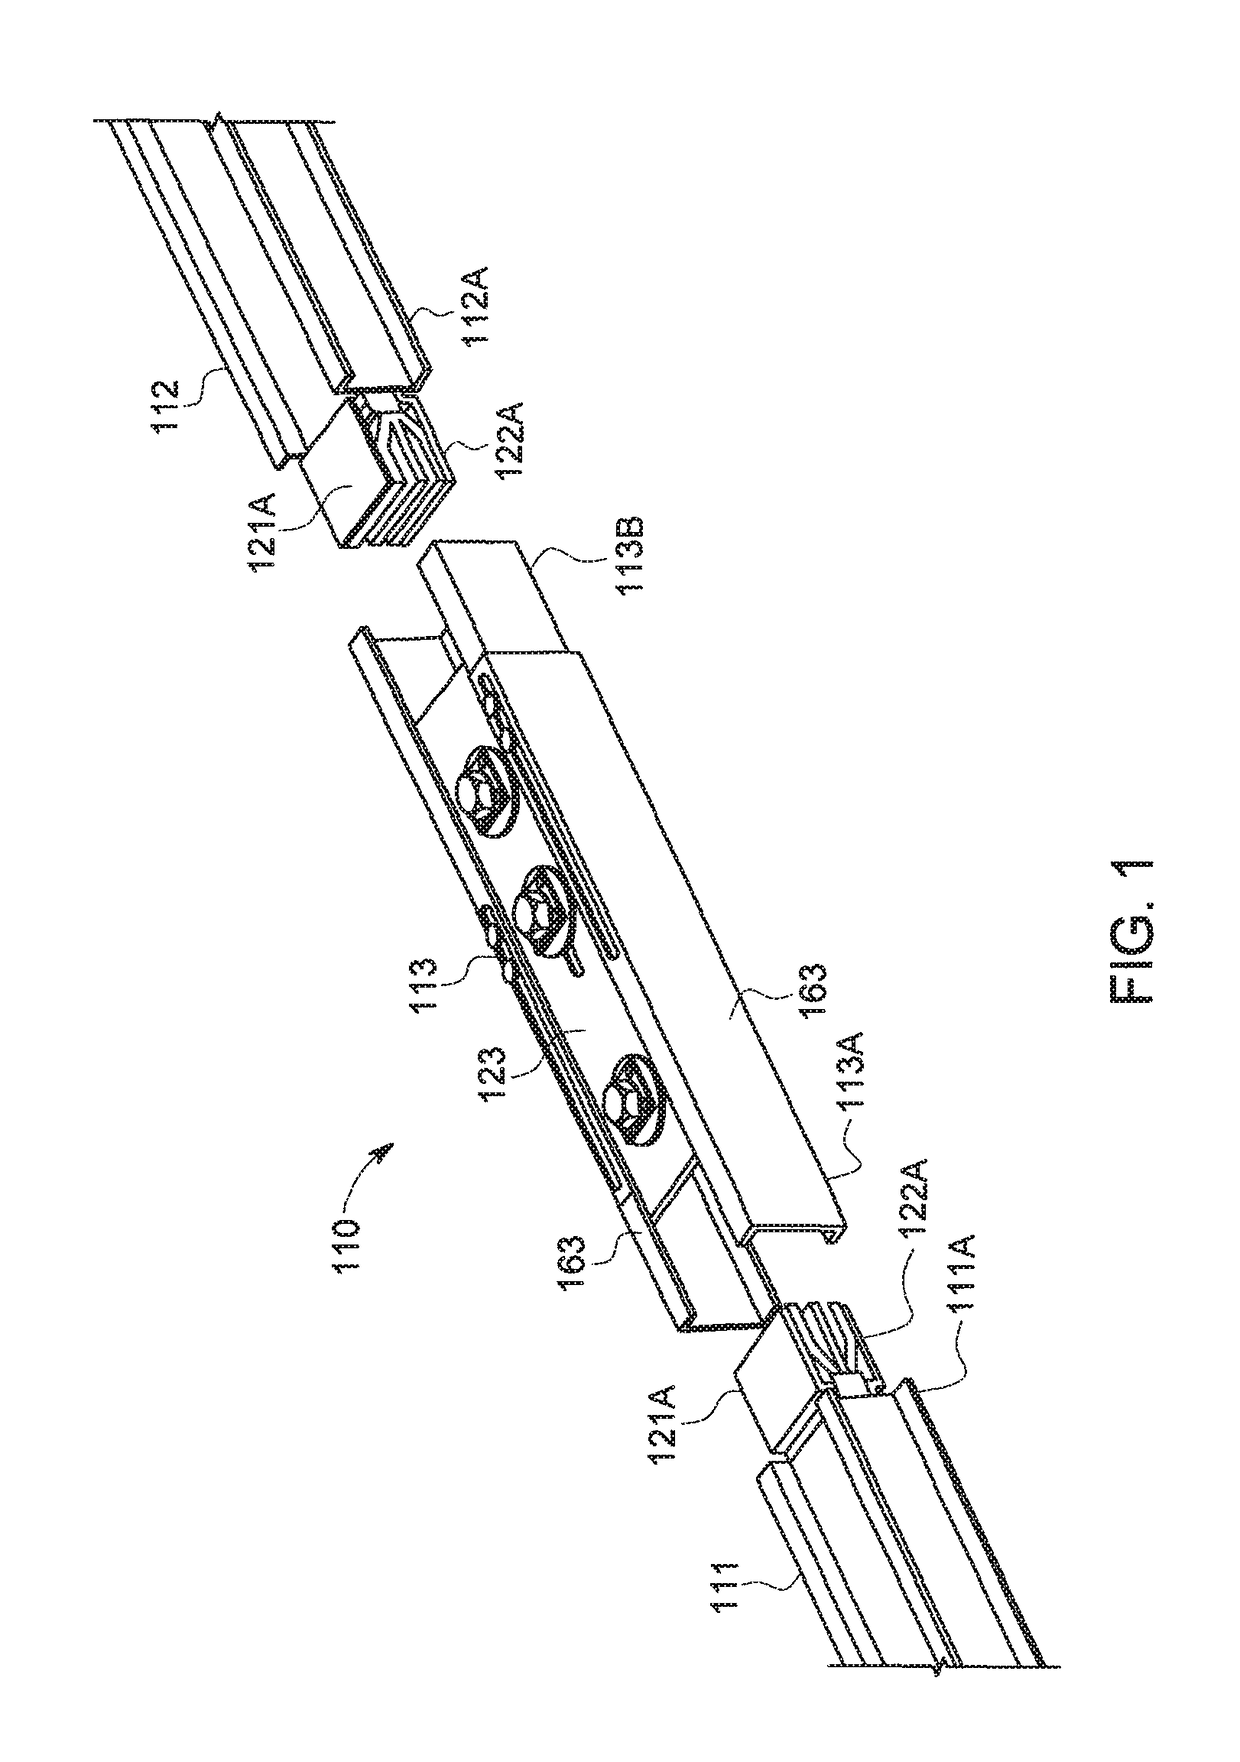 Electrical busway joint with self-adjusting braces